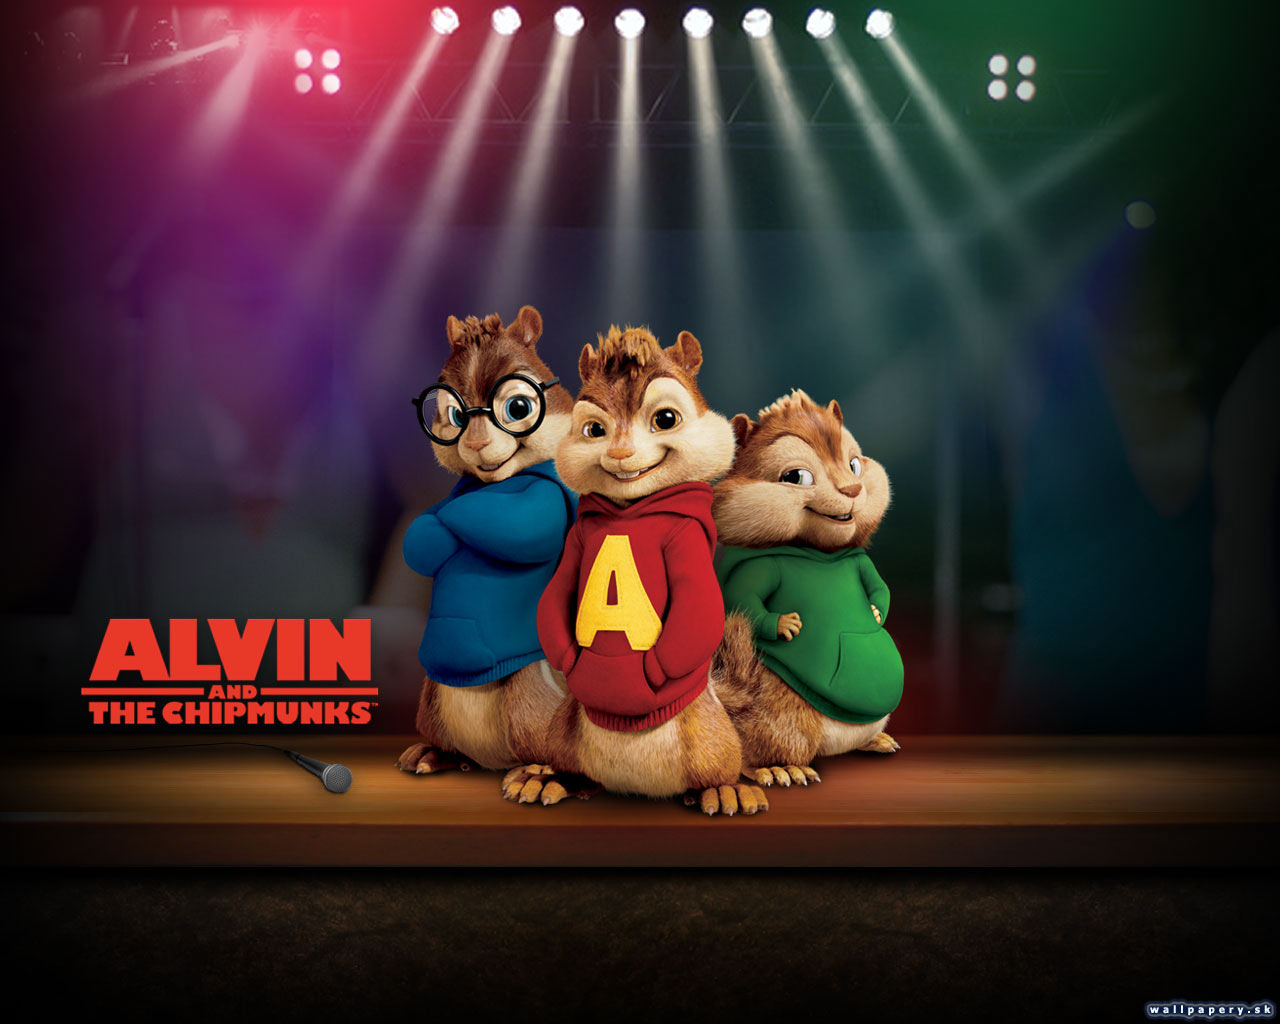 Alvin and The Chipmunks - wallpaper 8